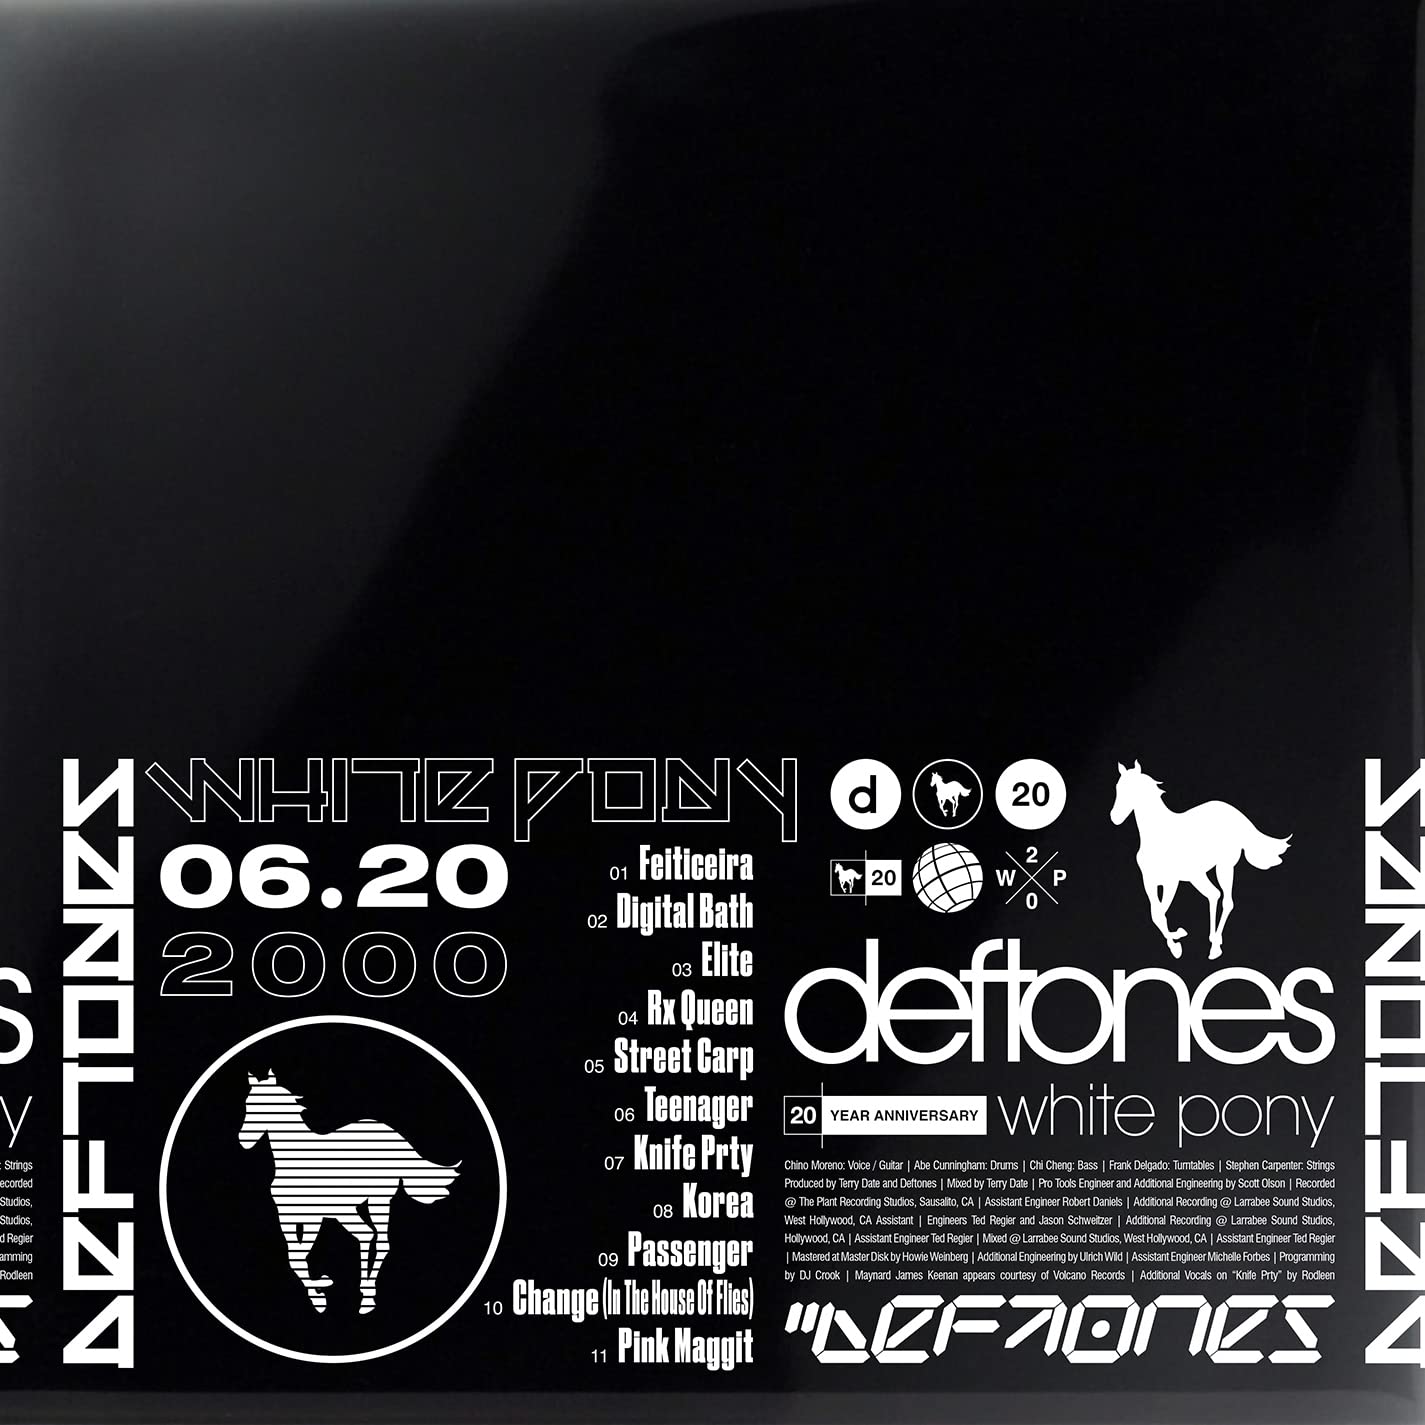 White Pony (X) (20Th Anniversary Deluxe Edition/4Lp) (I) on MovieShack